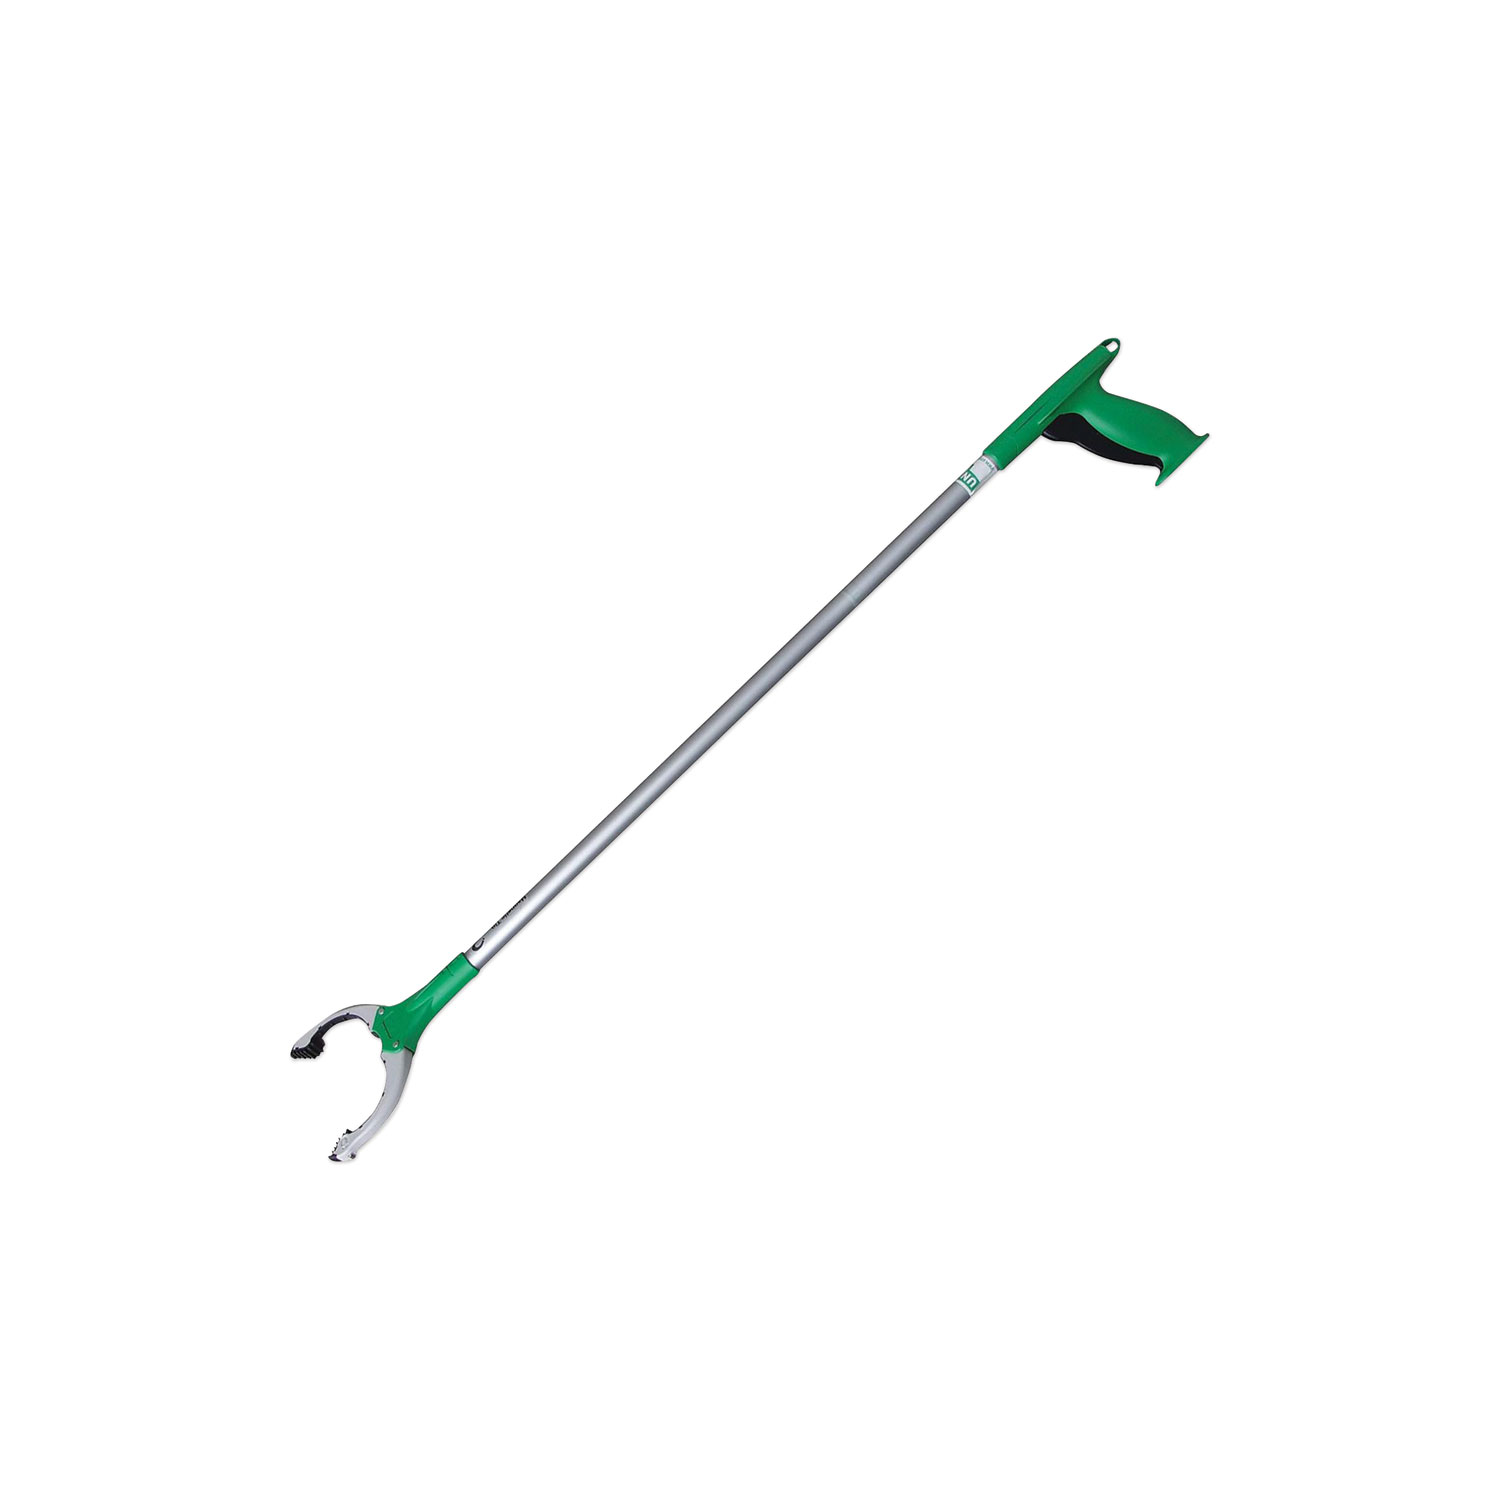  Unger NT090 Nifty Nabber Trigger-Grip Extension Arm, 36.54, Silver/Green (UNGNT090) 